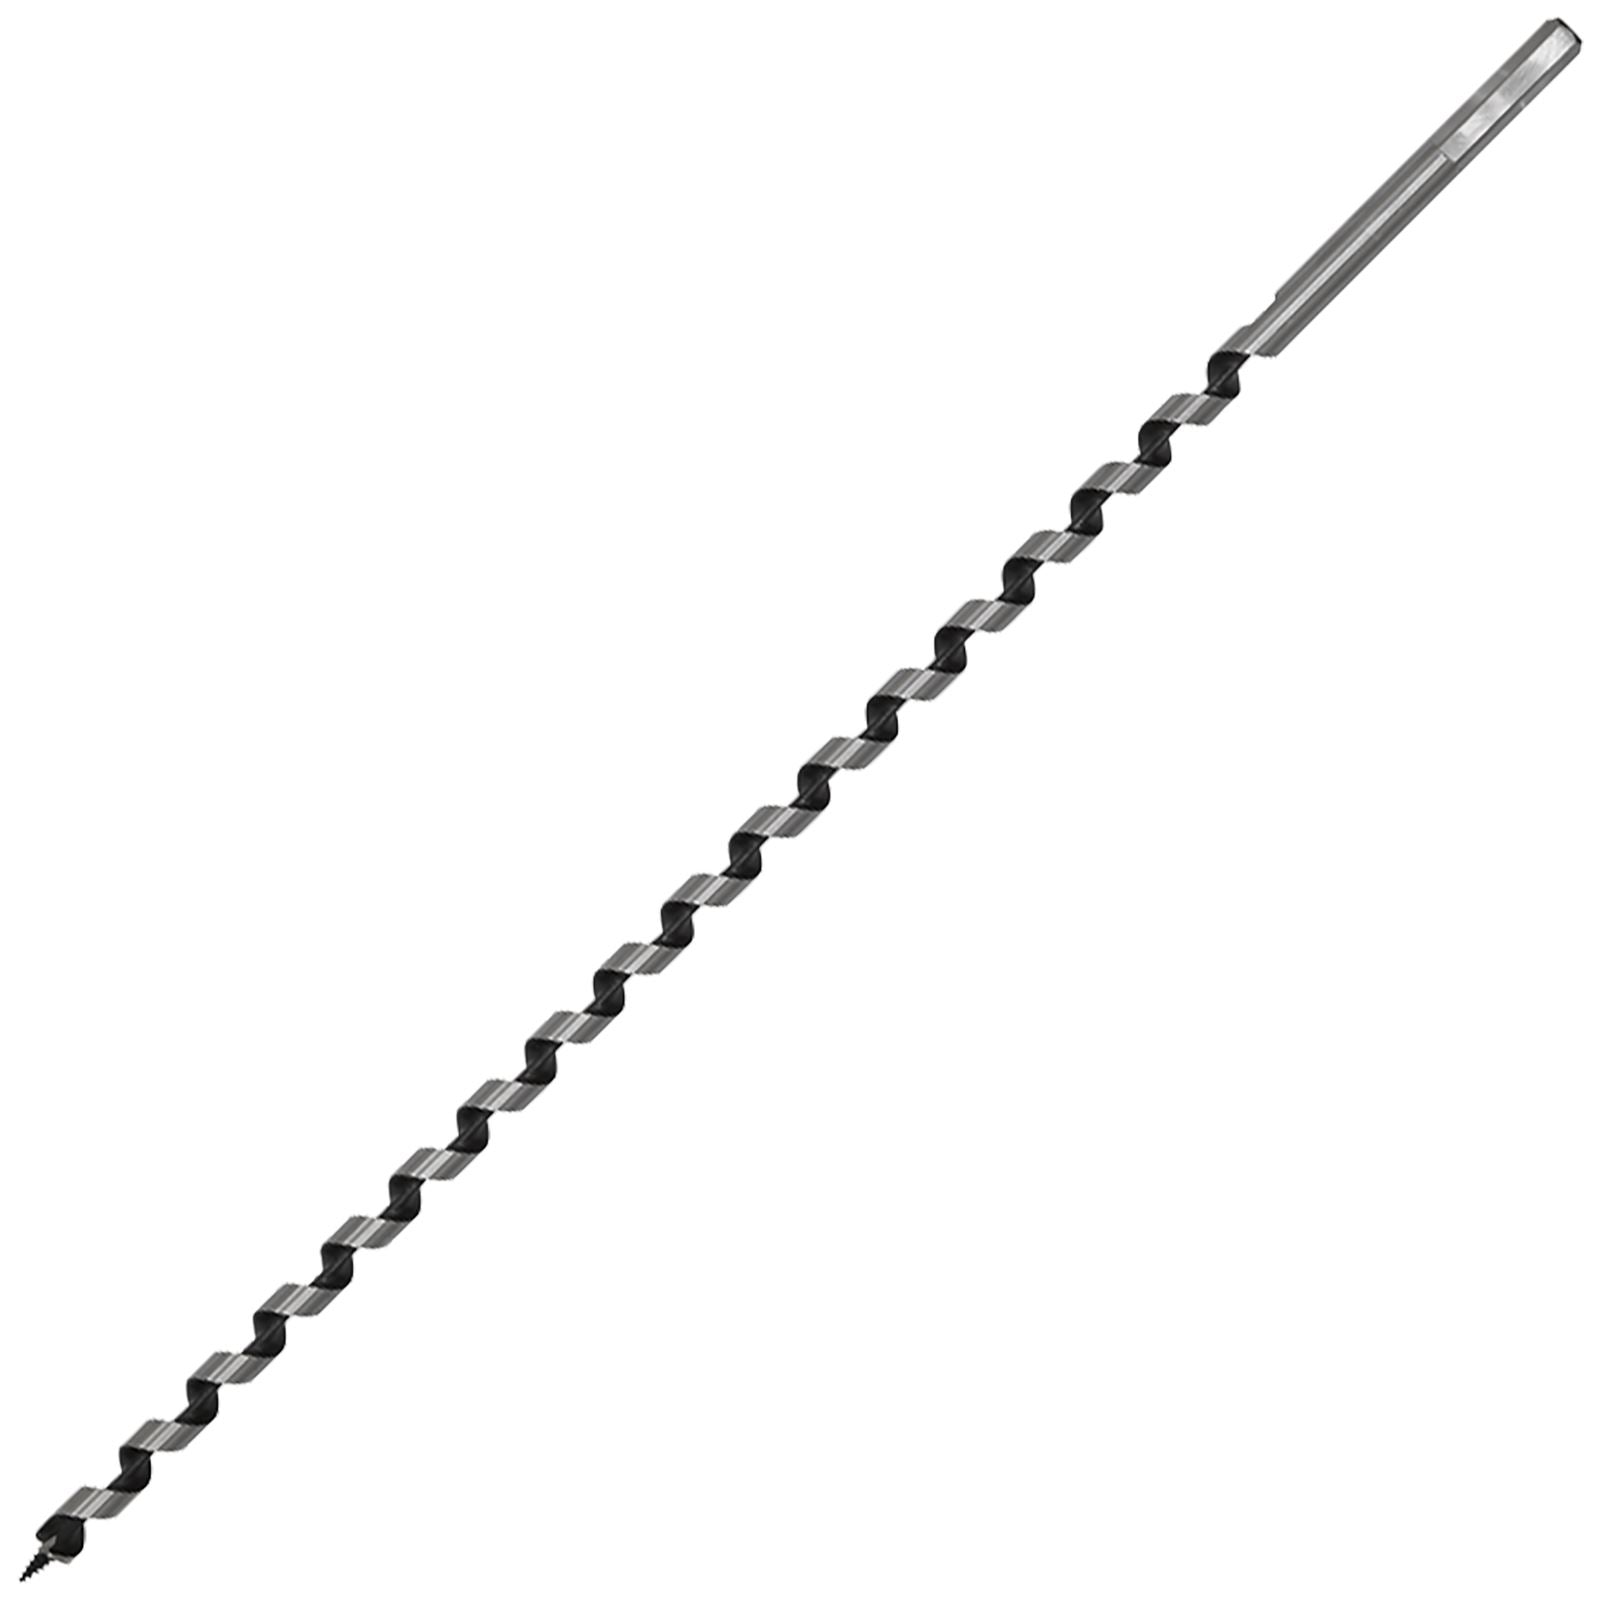 Worksafe by Sealey Auger Wood Drill Bit 8mm x 460mm